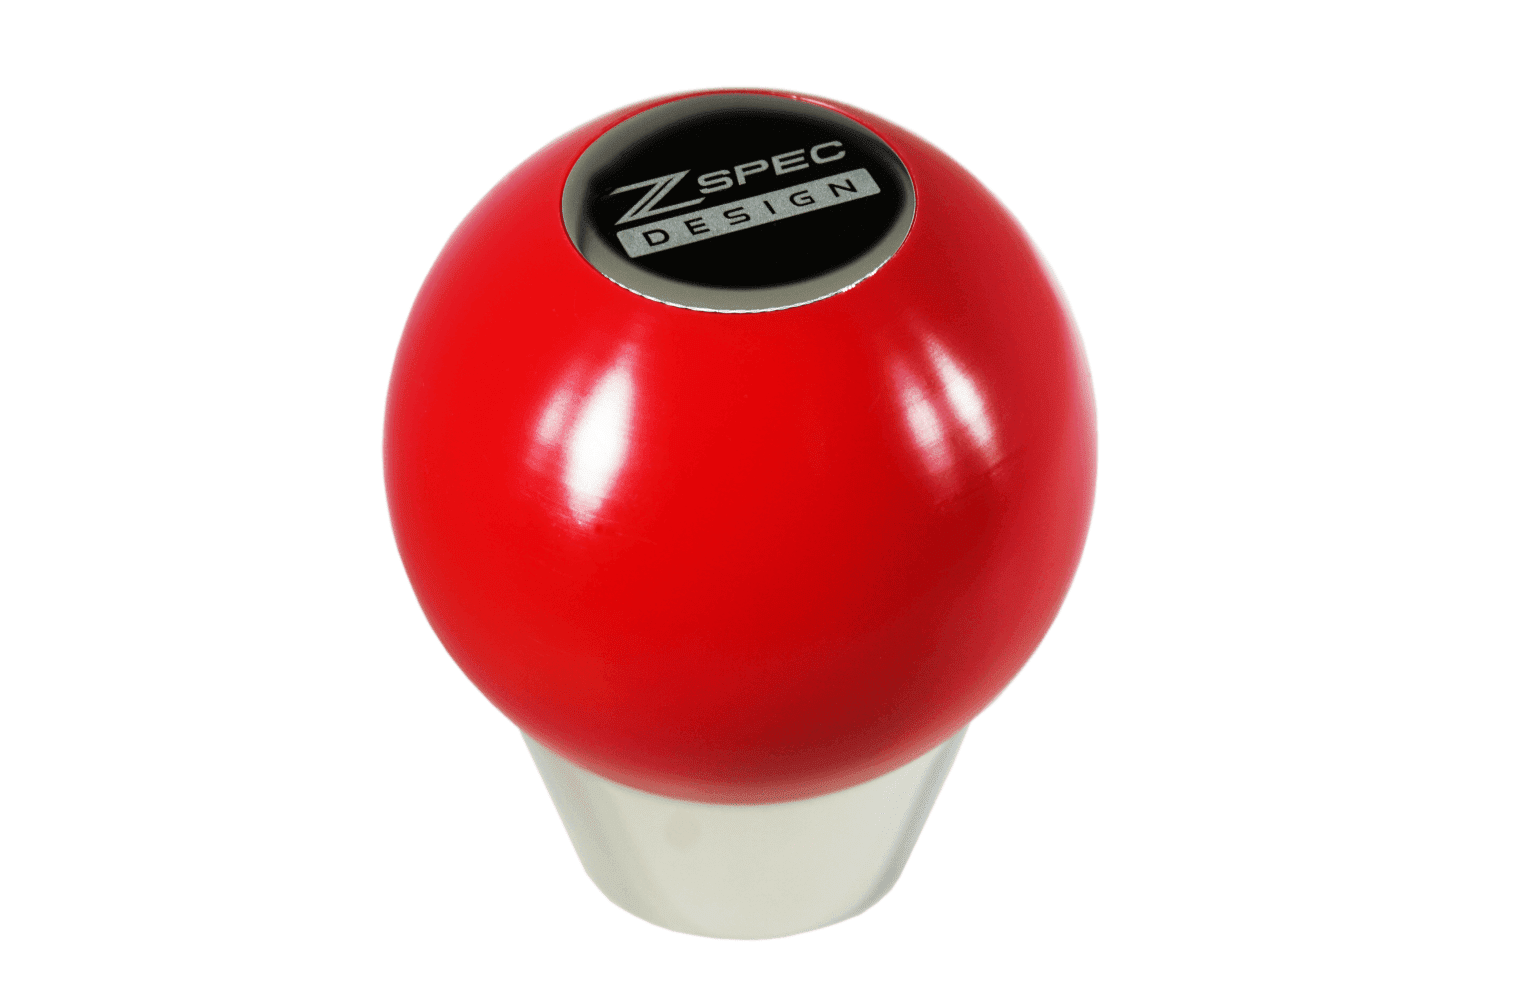 ZSPEC Shift Knob, M10-1.25, Delrin & Stainless, 5-Speed Shift Pattern Coin Nissan NISMO 300zx Interior Boot Shifter Car Show Auto Nismo Project1.25, Delrin & Stainless, 5-Speed Shift Pattern Coin Nissan NISMO 300zx